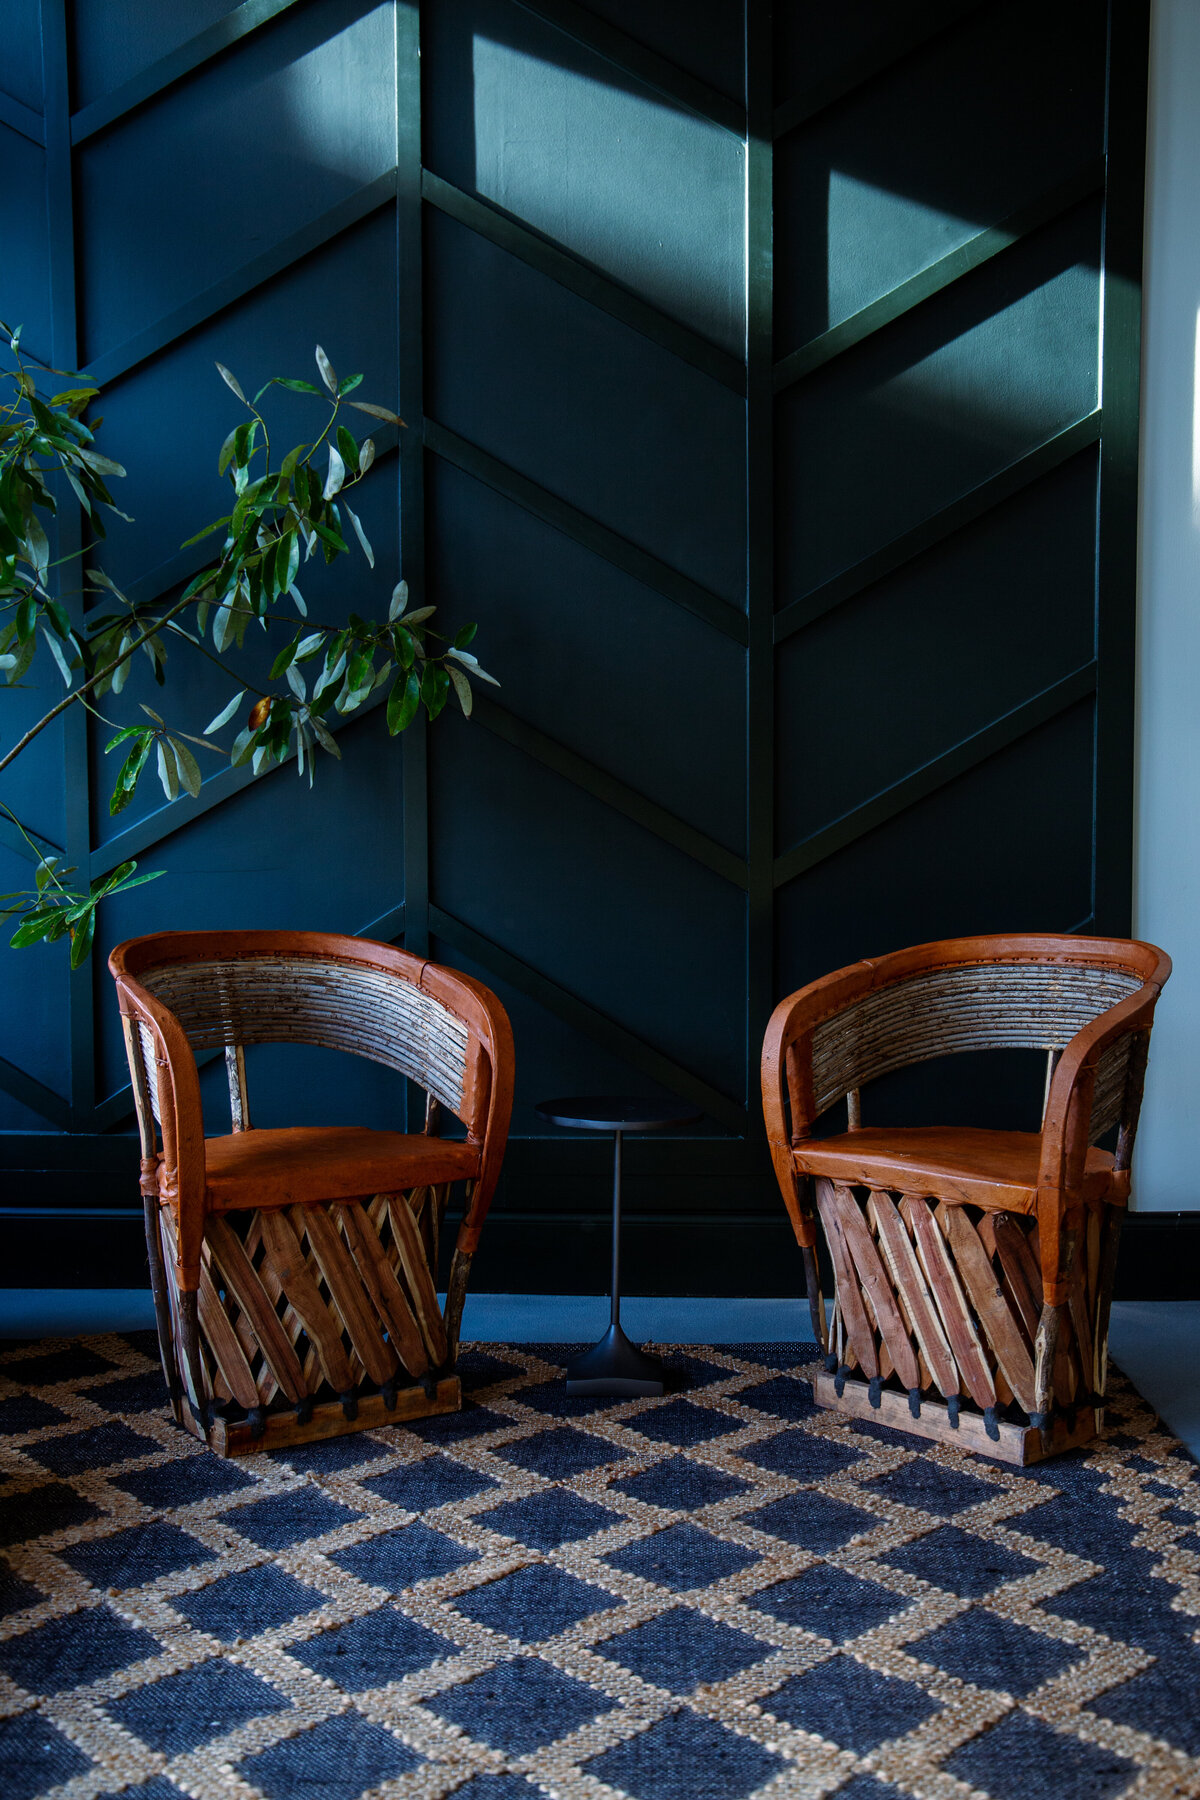 Image of two wicker and leather chairs in front of a dark green wall in a restaurants seated waiting area.